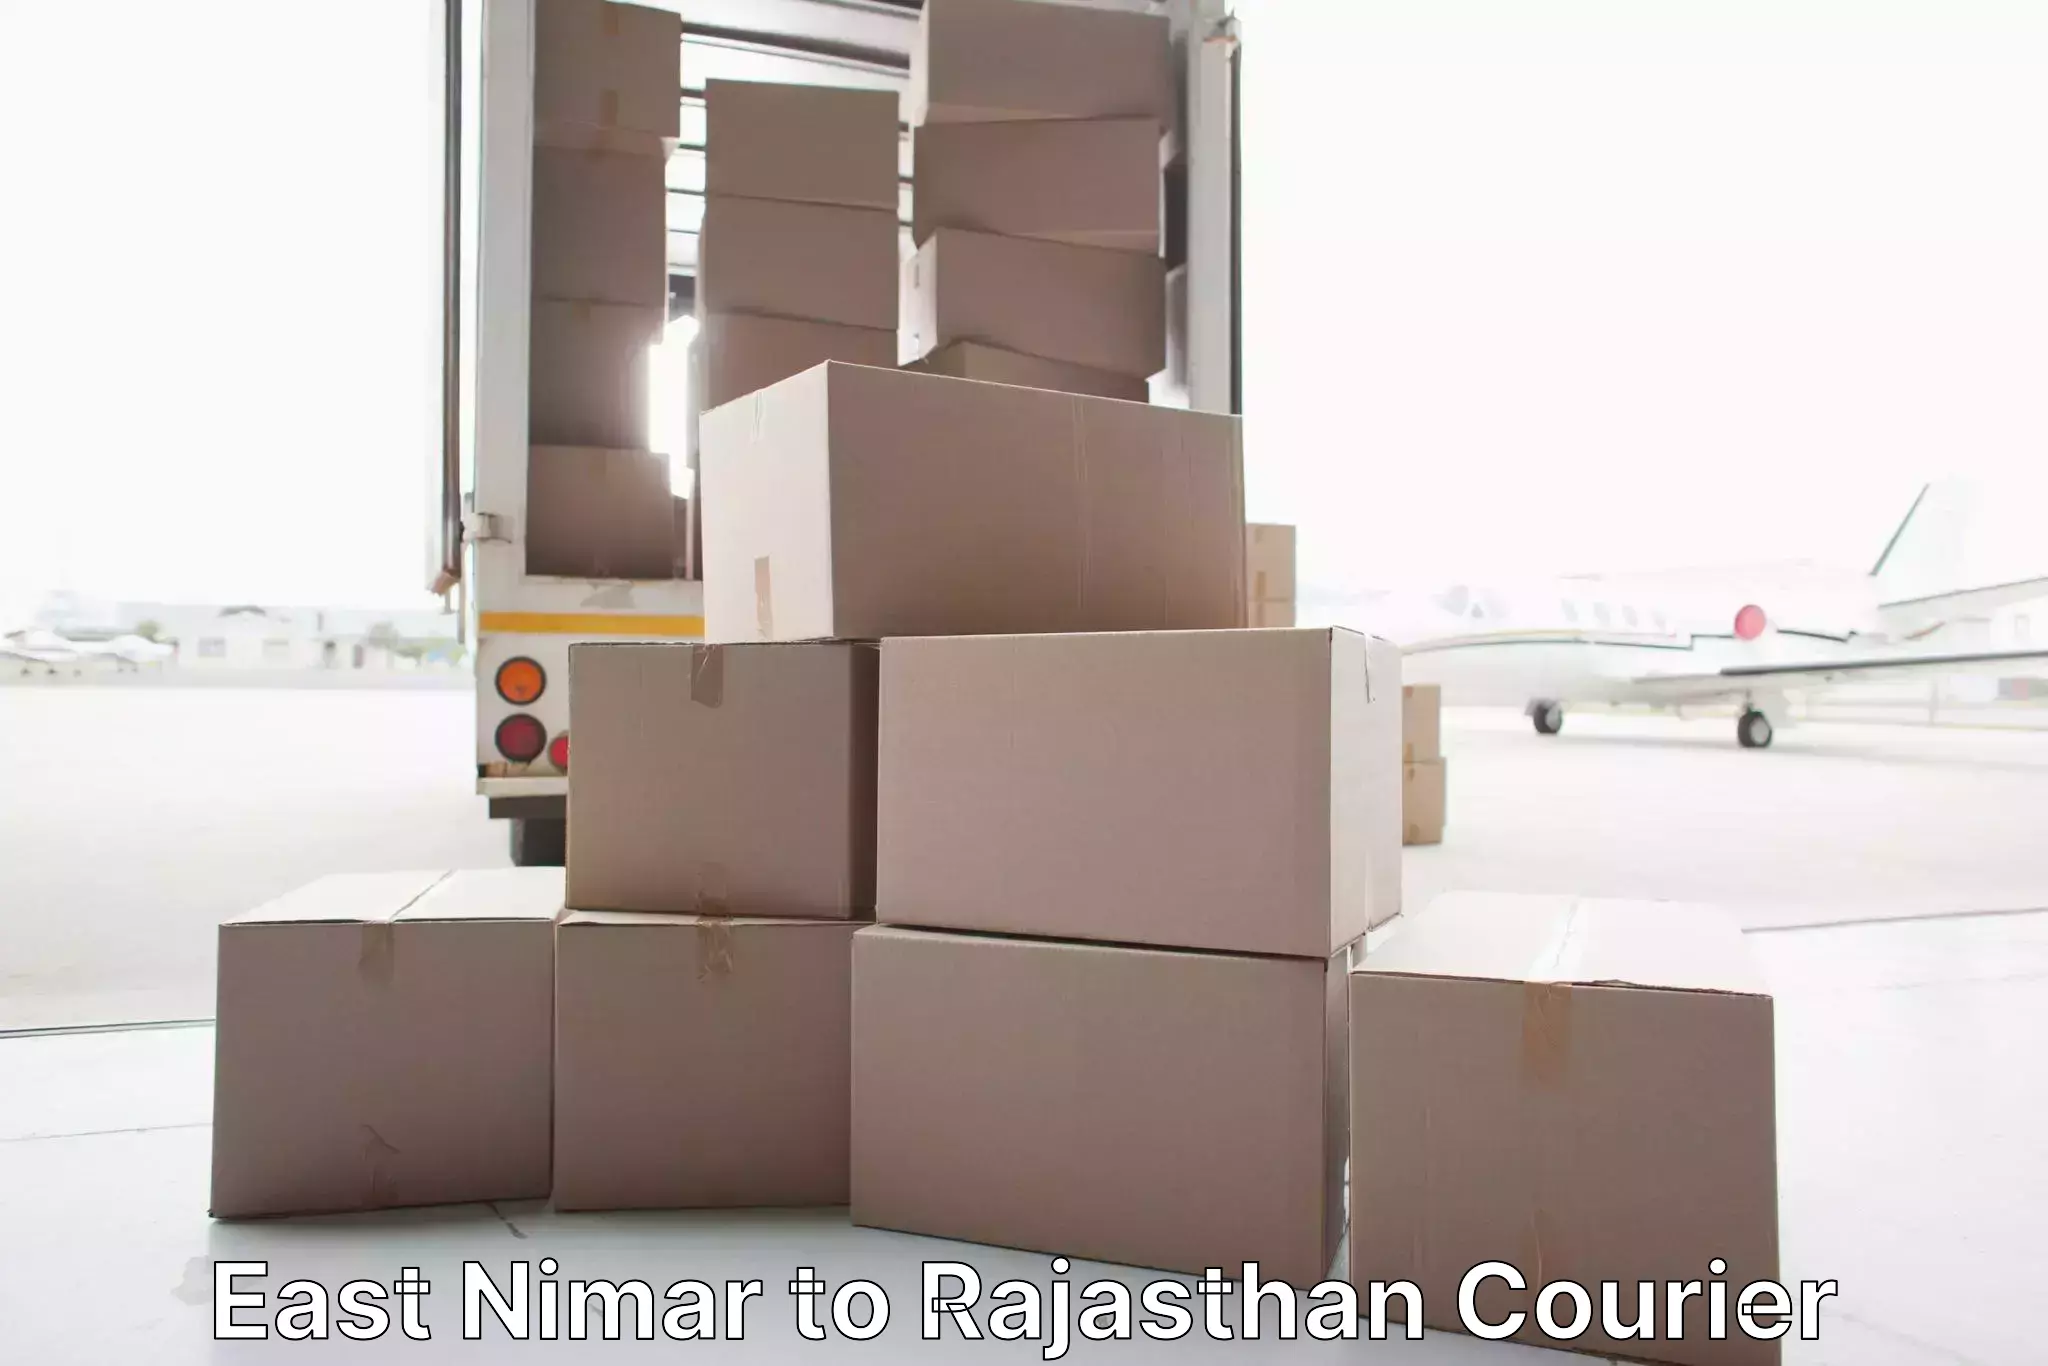 Trusted relocation experts East Nimar to Rajsamand